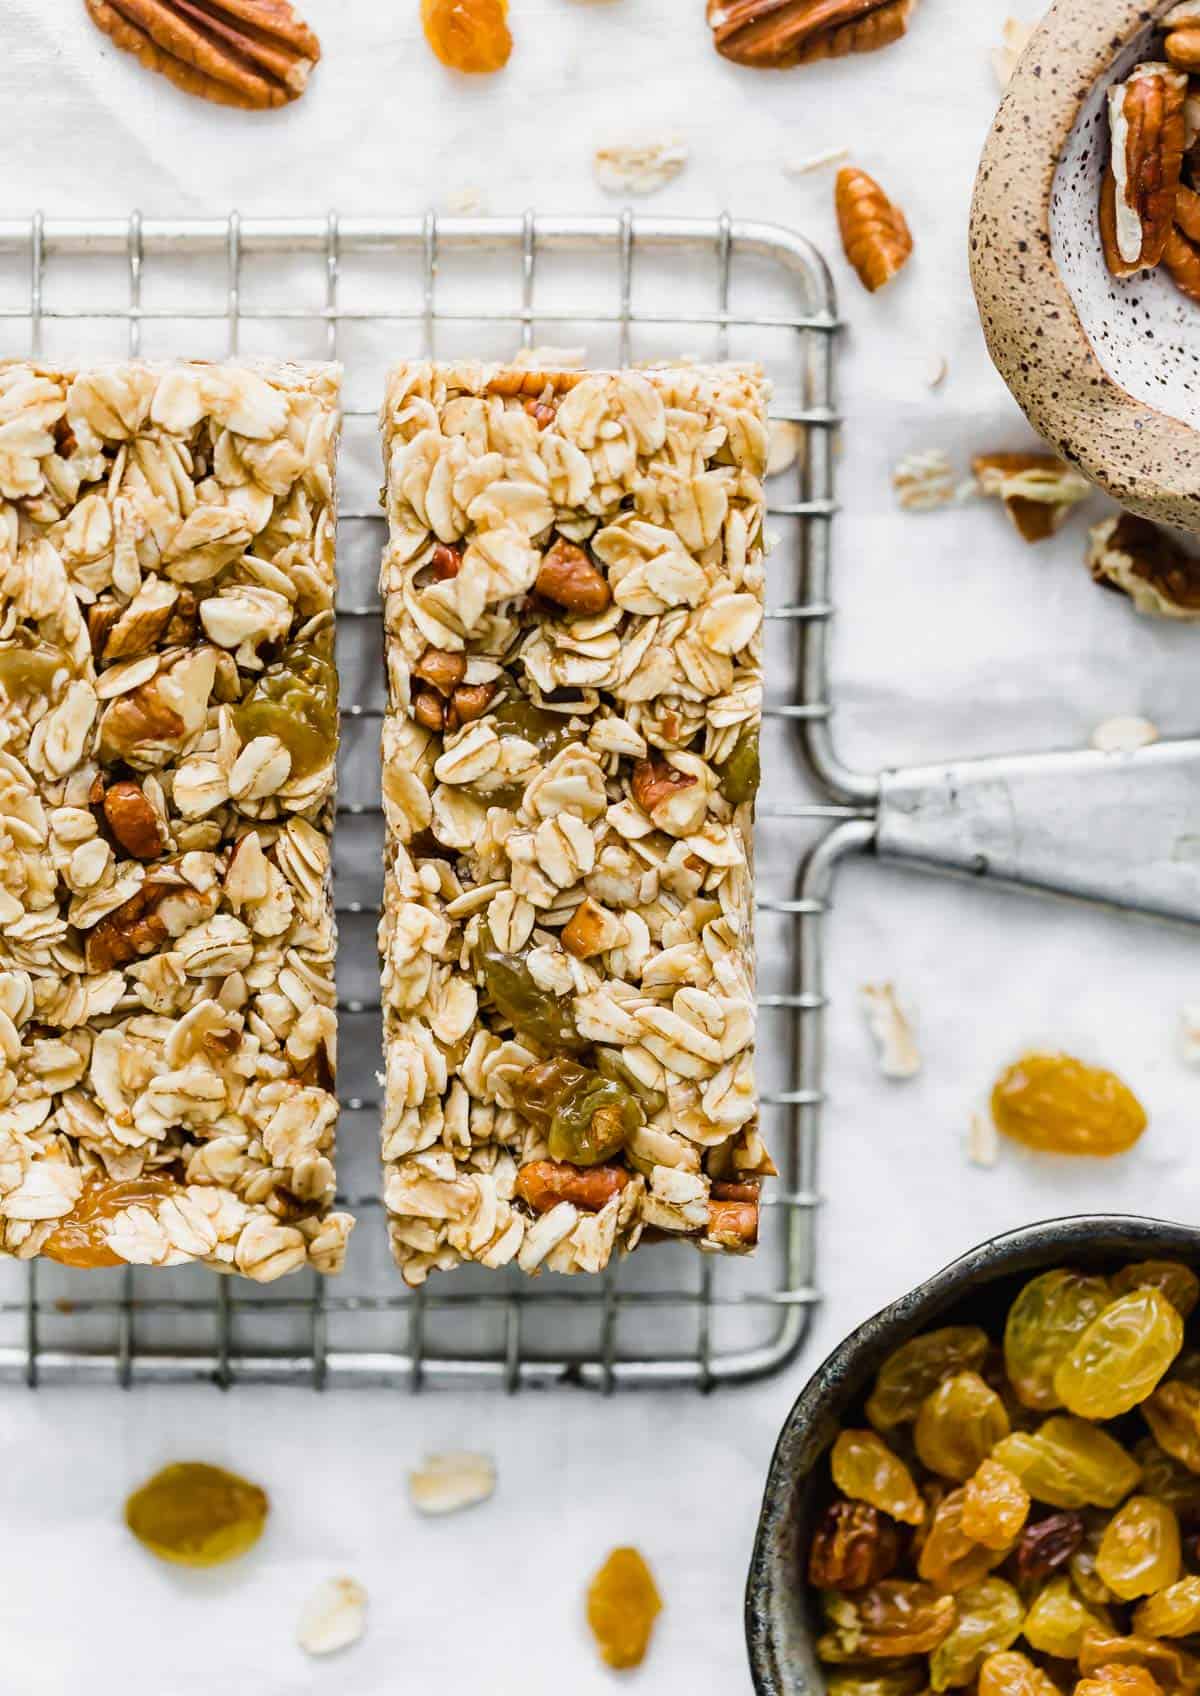 Oatmeal Raisin Granola Bars with pecans on a wire rack against a white background.